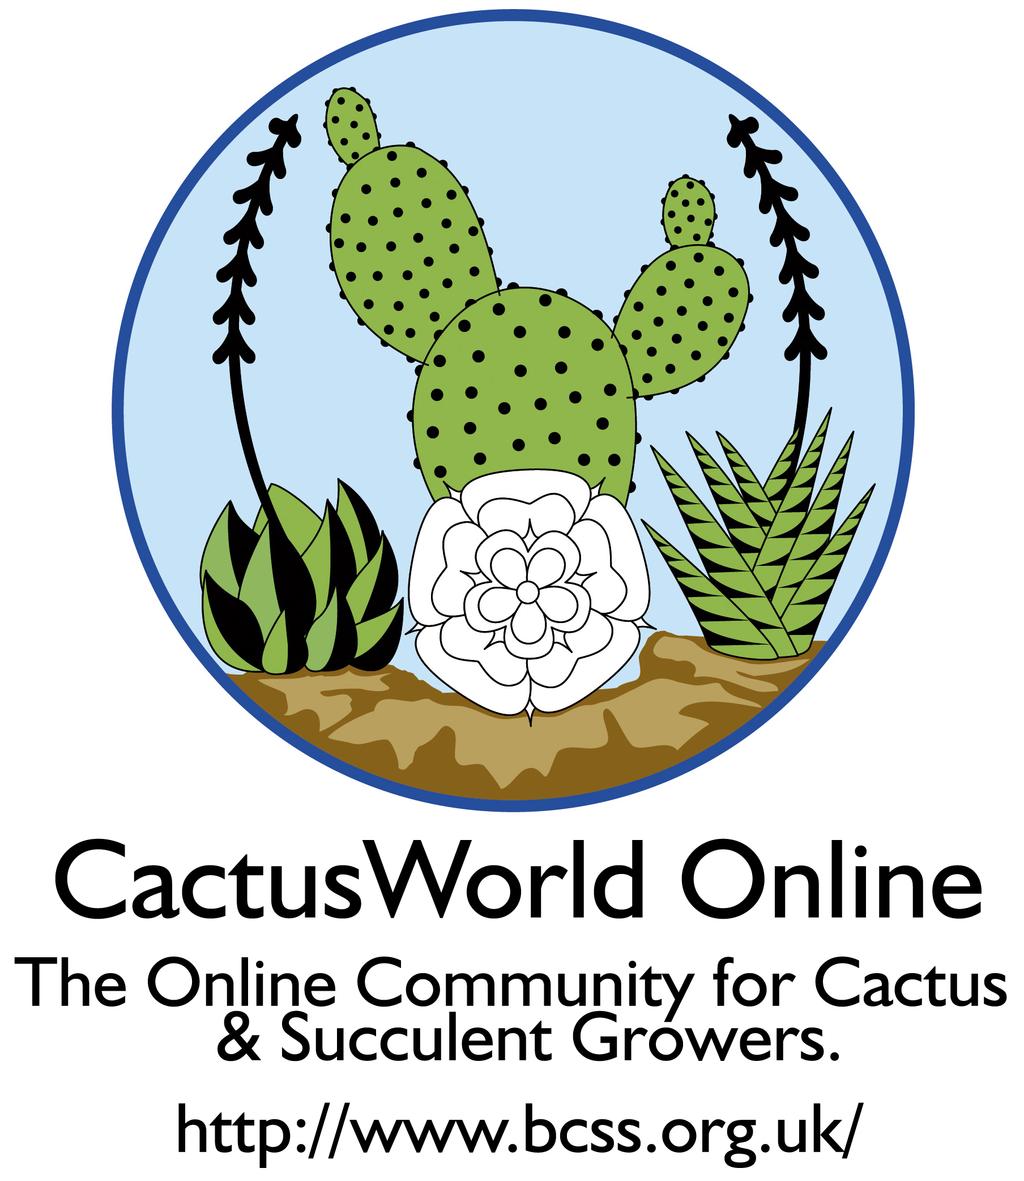 BRITISH CACTUS AND SUCCULENT SOCIETY PORTSMOUTH & DISTRICT BRANCH SUMMER SHOW SATURDAY 3RD JUNE 2017 AT CHRIST CHURCH HALL London Road, Widley, Waterlooville, Hampshire PO7 5AT ENTRANCE FEE 1 (Light